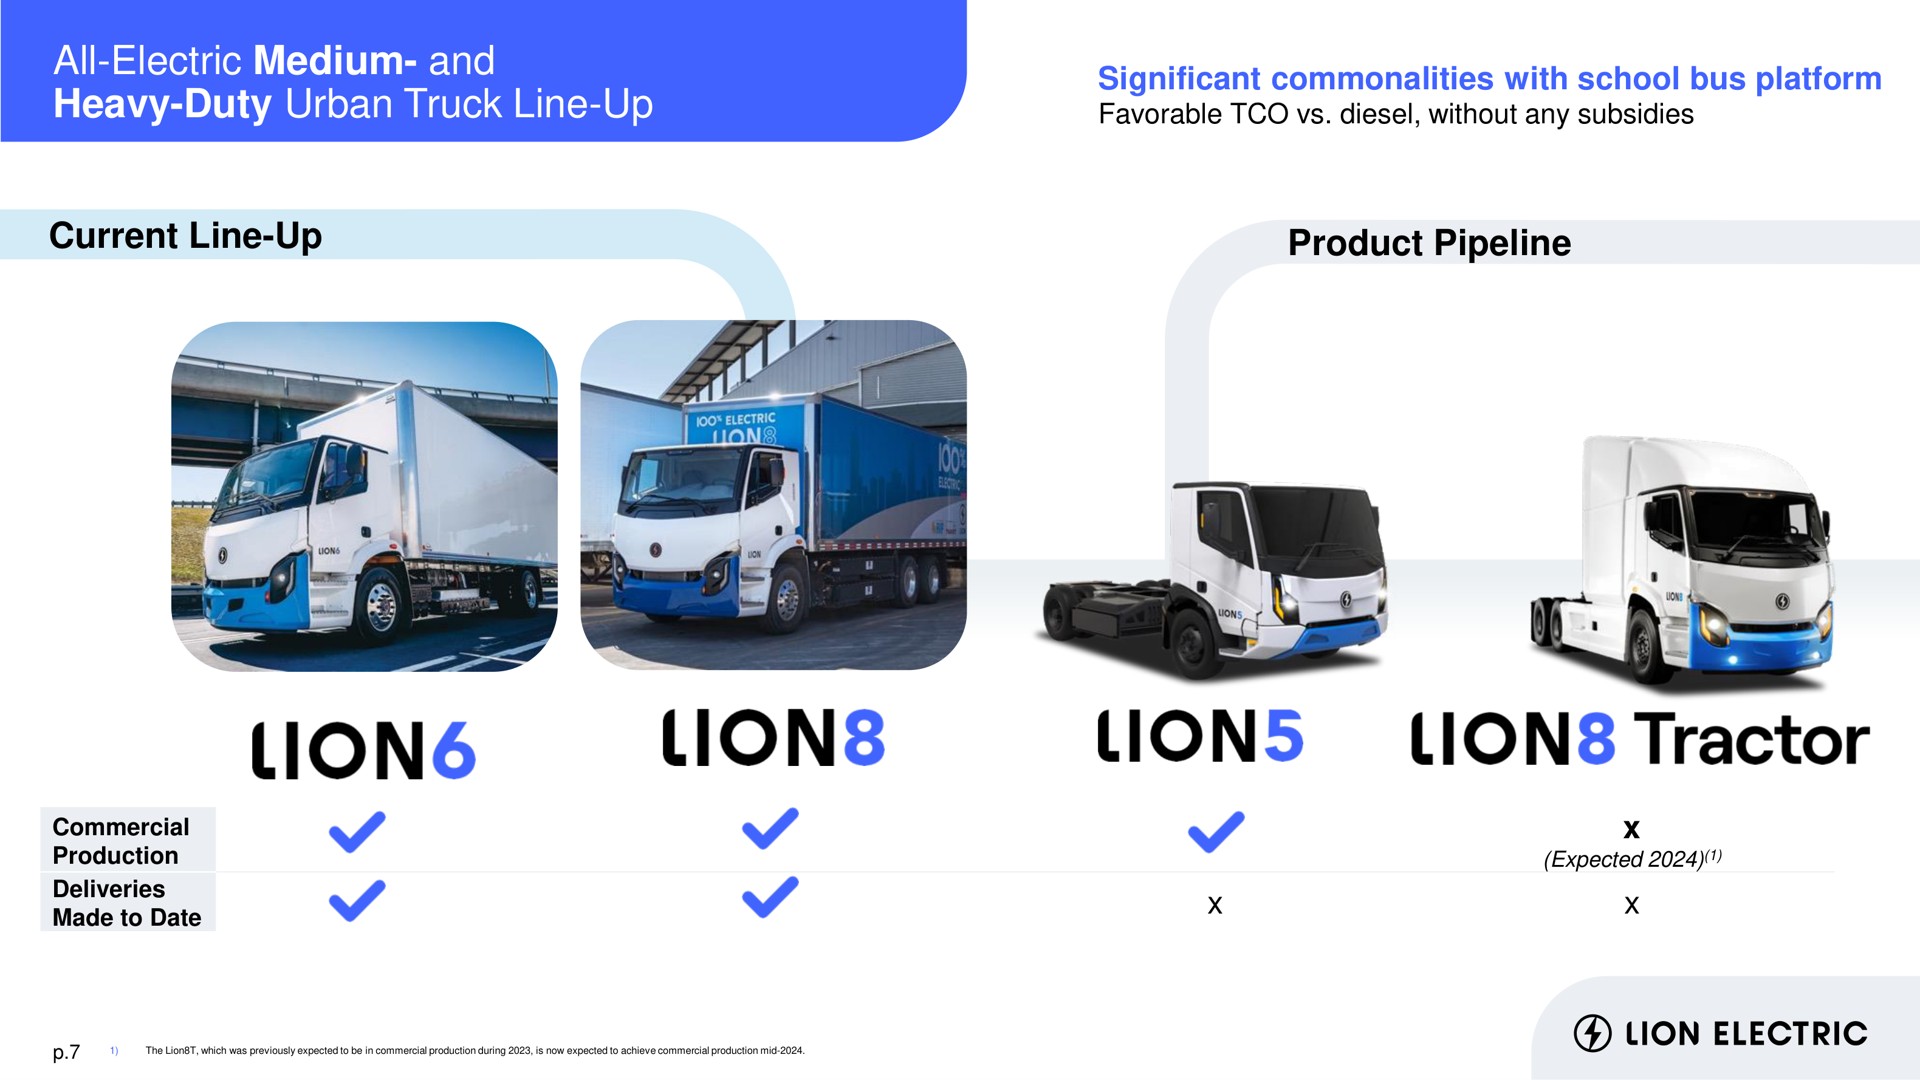 all electric medium and heavy duty urban truck line up significant commonalities with school bus platform current line up product pipeline what makes lion a leader favorable diesel without any subsidies lions lions lions tractor commercial | Lion Electric